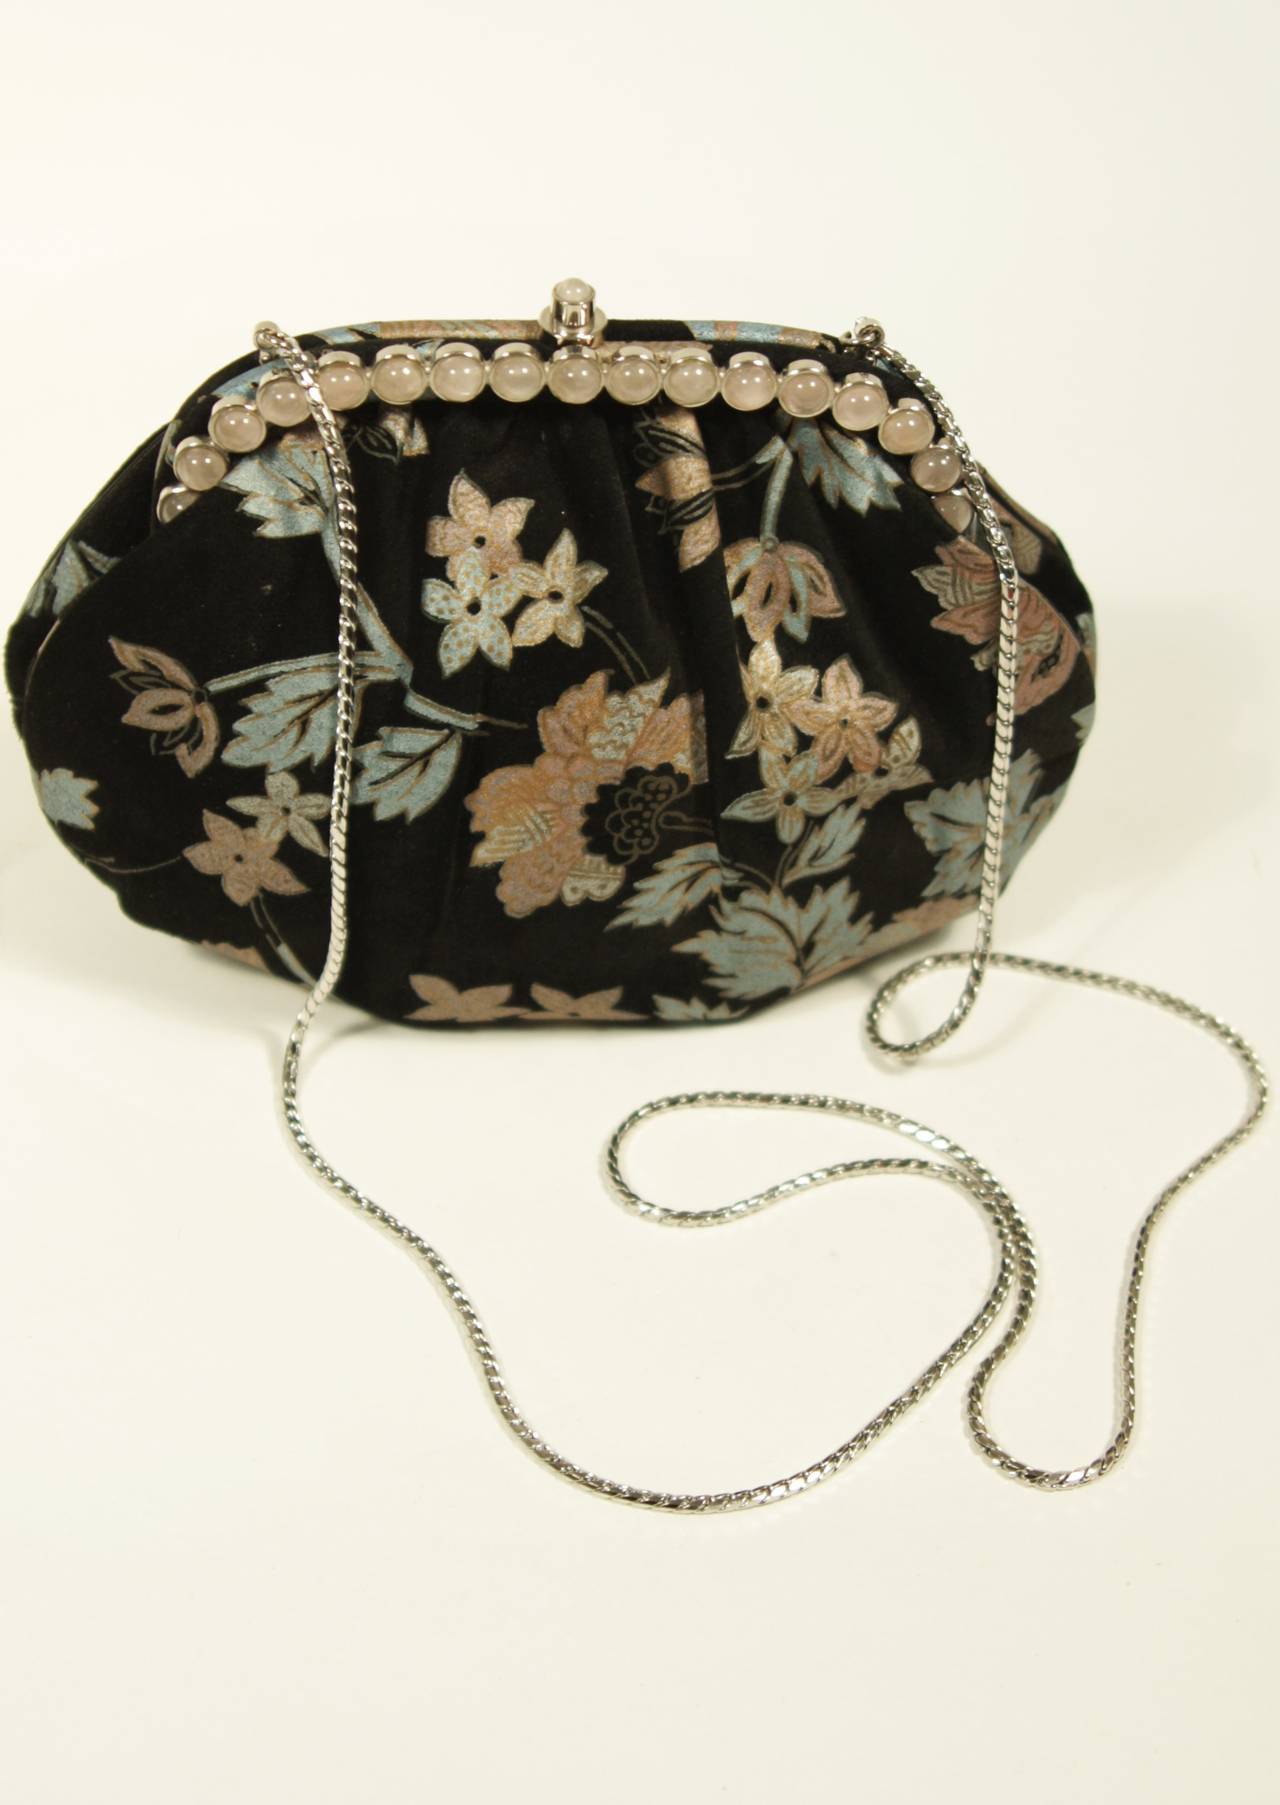 Judith Leiber Printed Suede Purse with Stone Accents 2